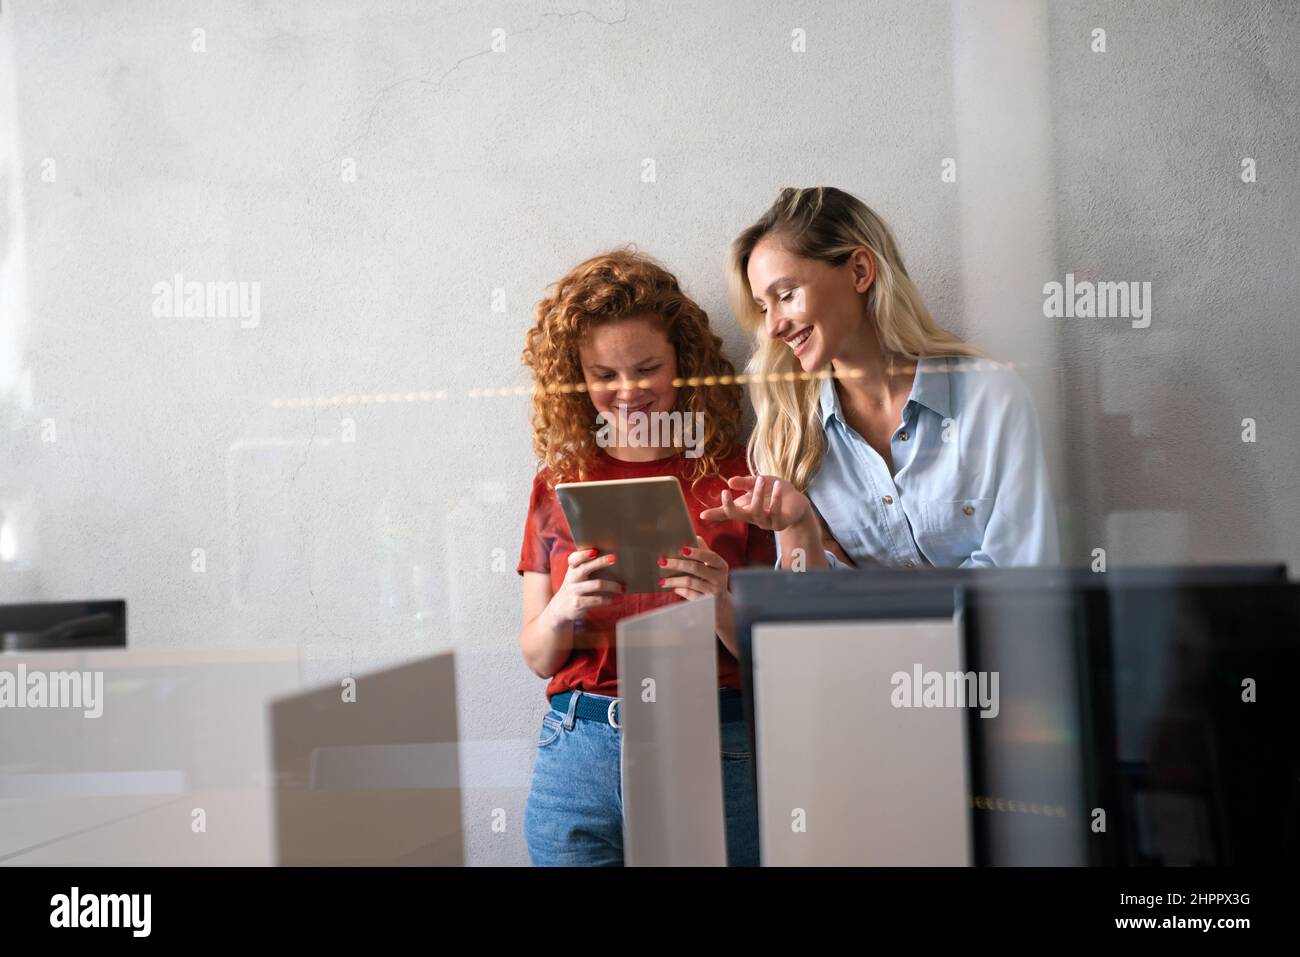 Happy smiling business women working together online on a tablet in office Stock Photo